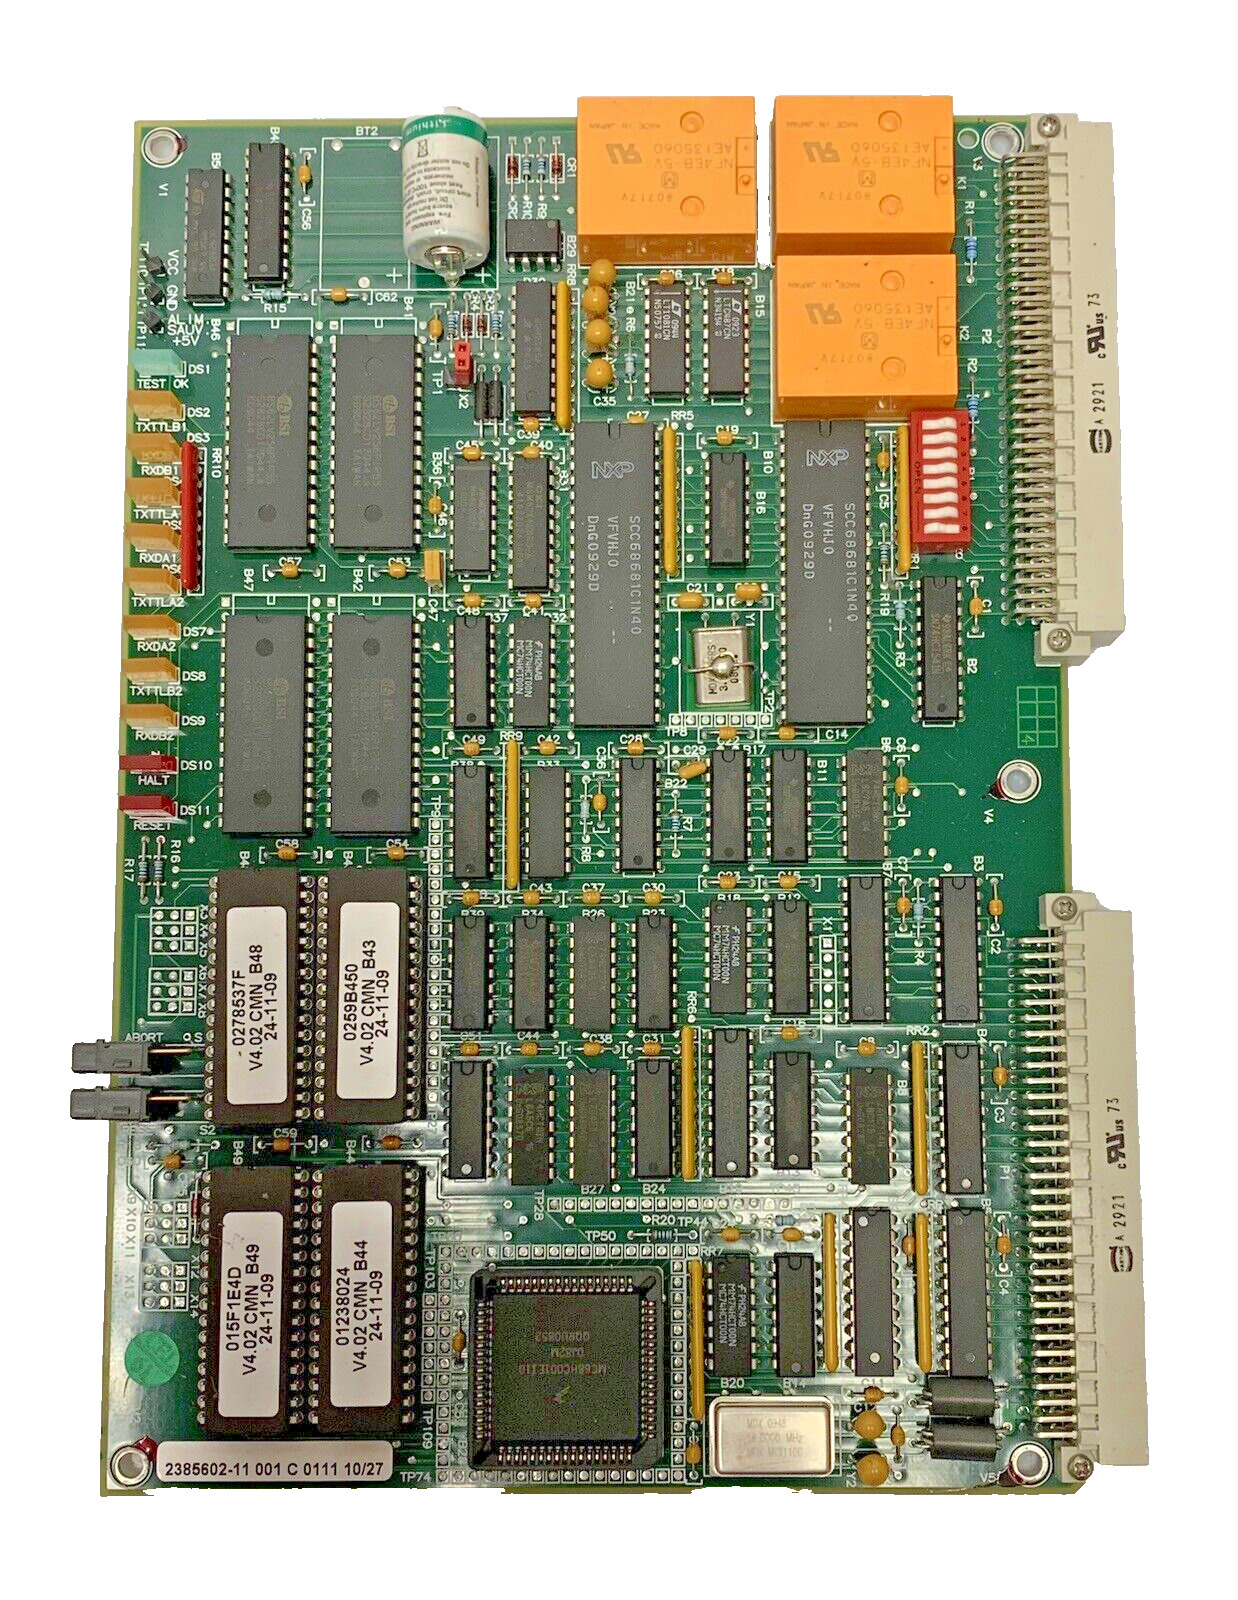 GE 2385602-11 CPU 400PL3 Board for GE Mammography